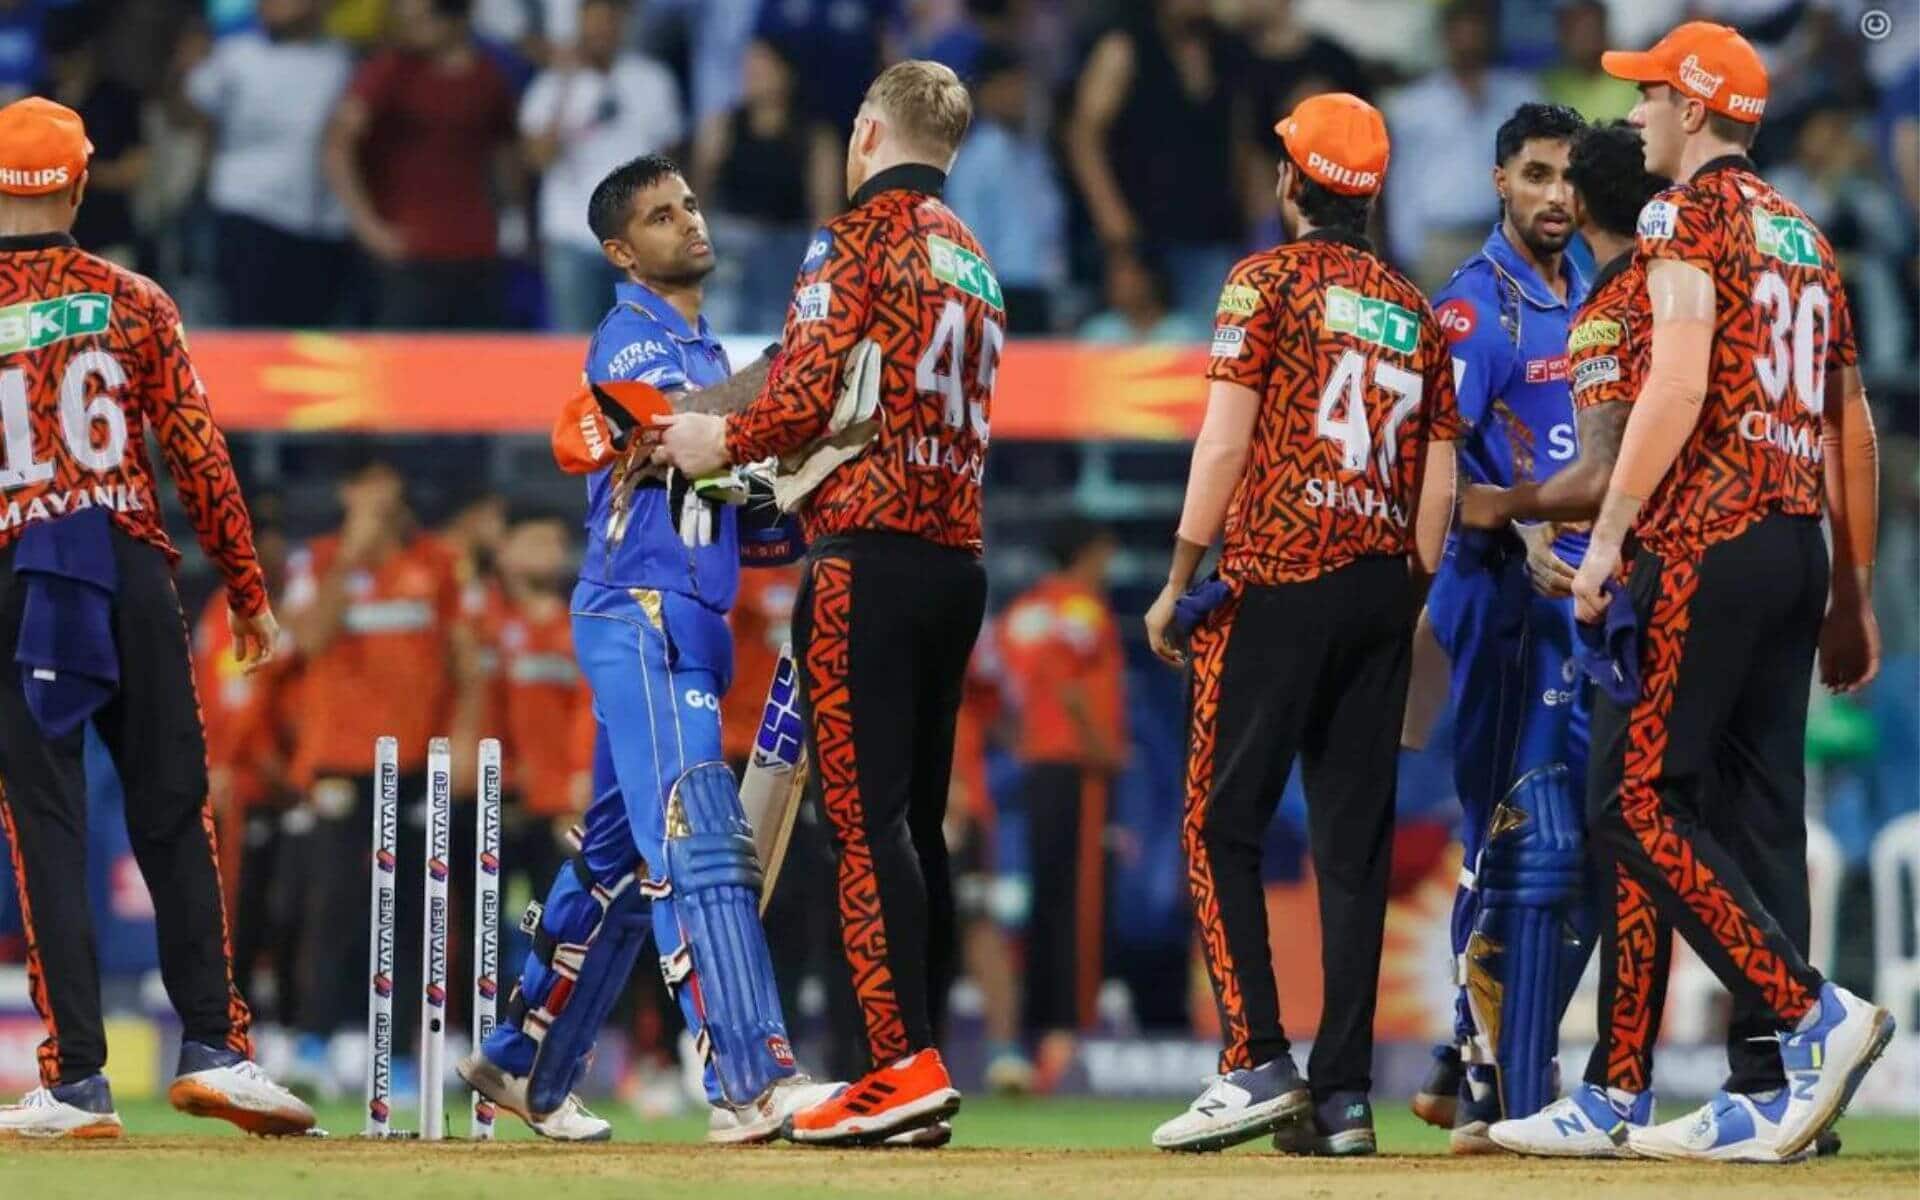 Pat Cummins & Co after getting defeated [IPLT20]